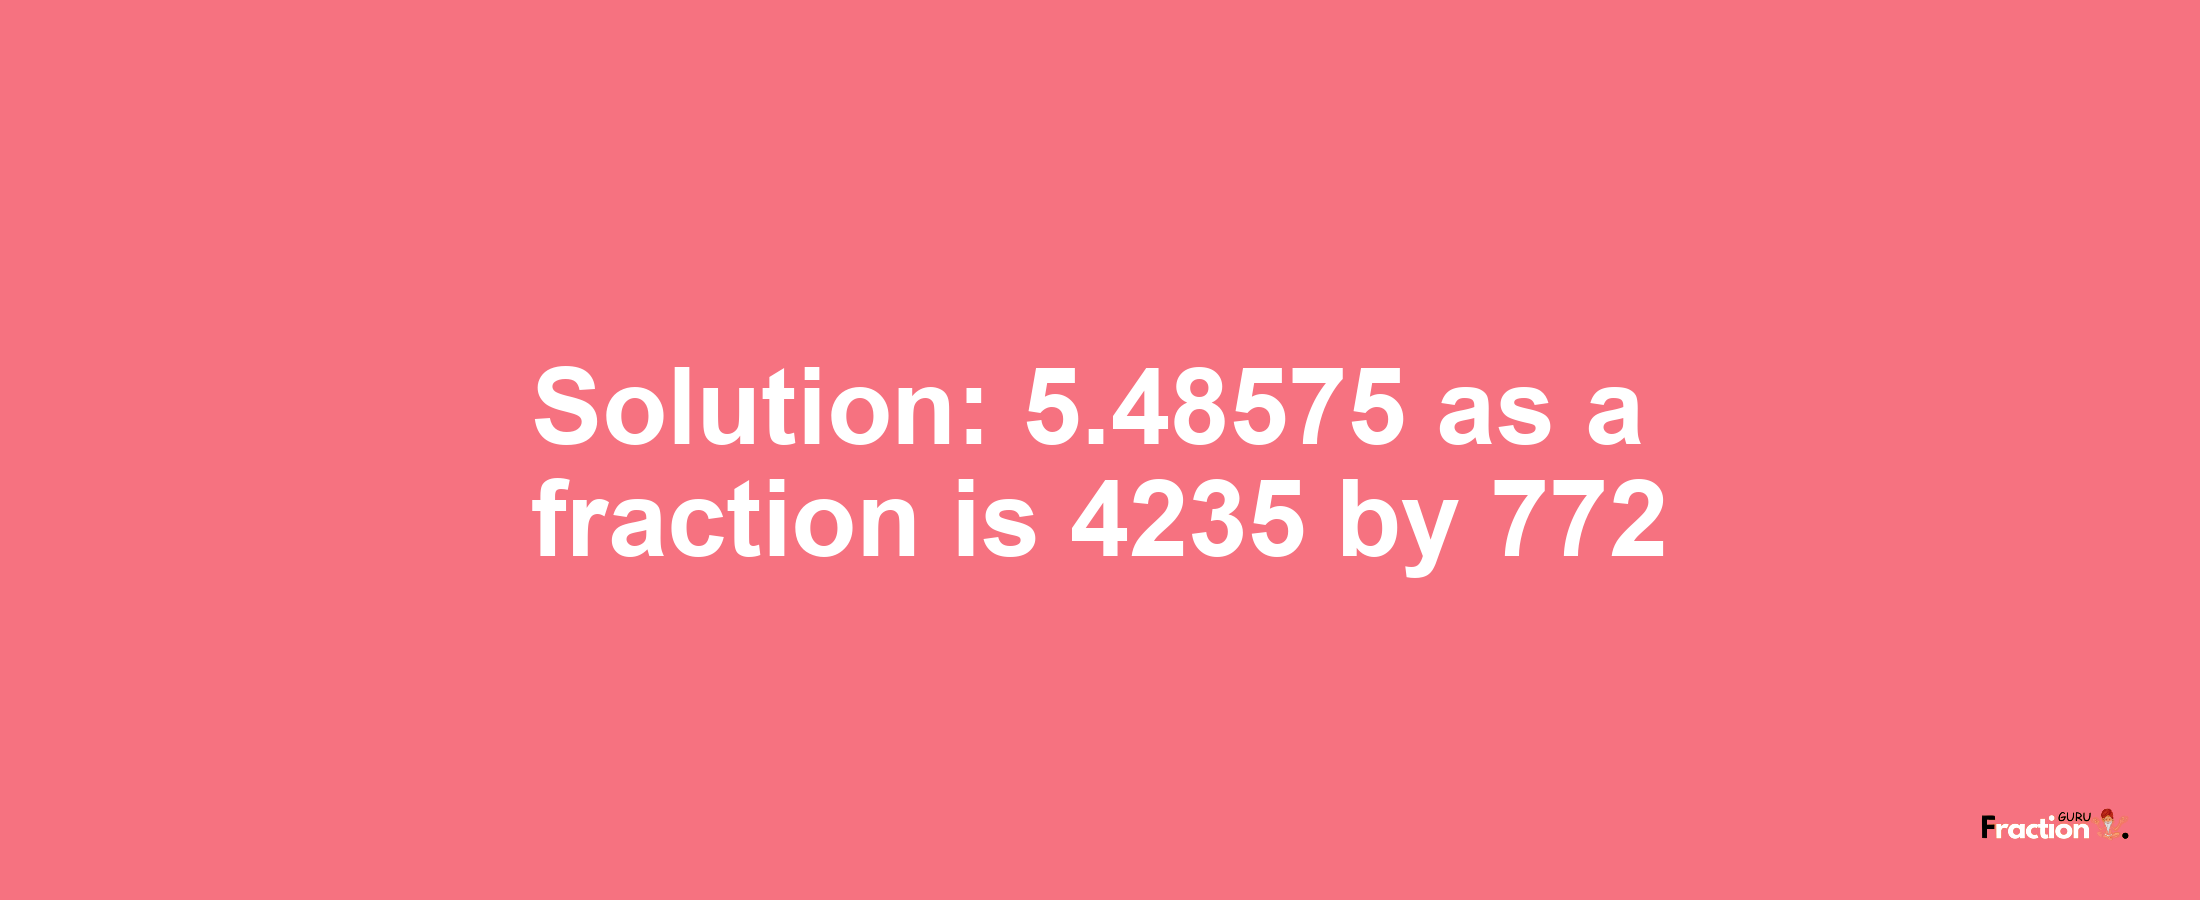 Solution:5.48575 as a fraction is 4235/772